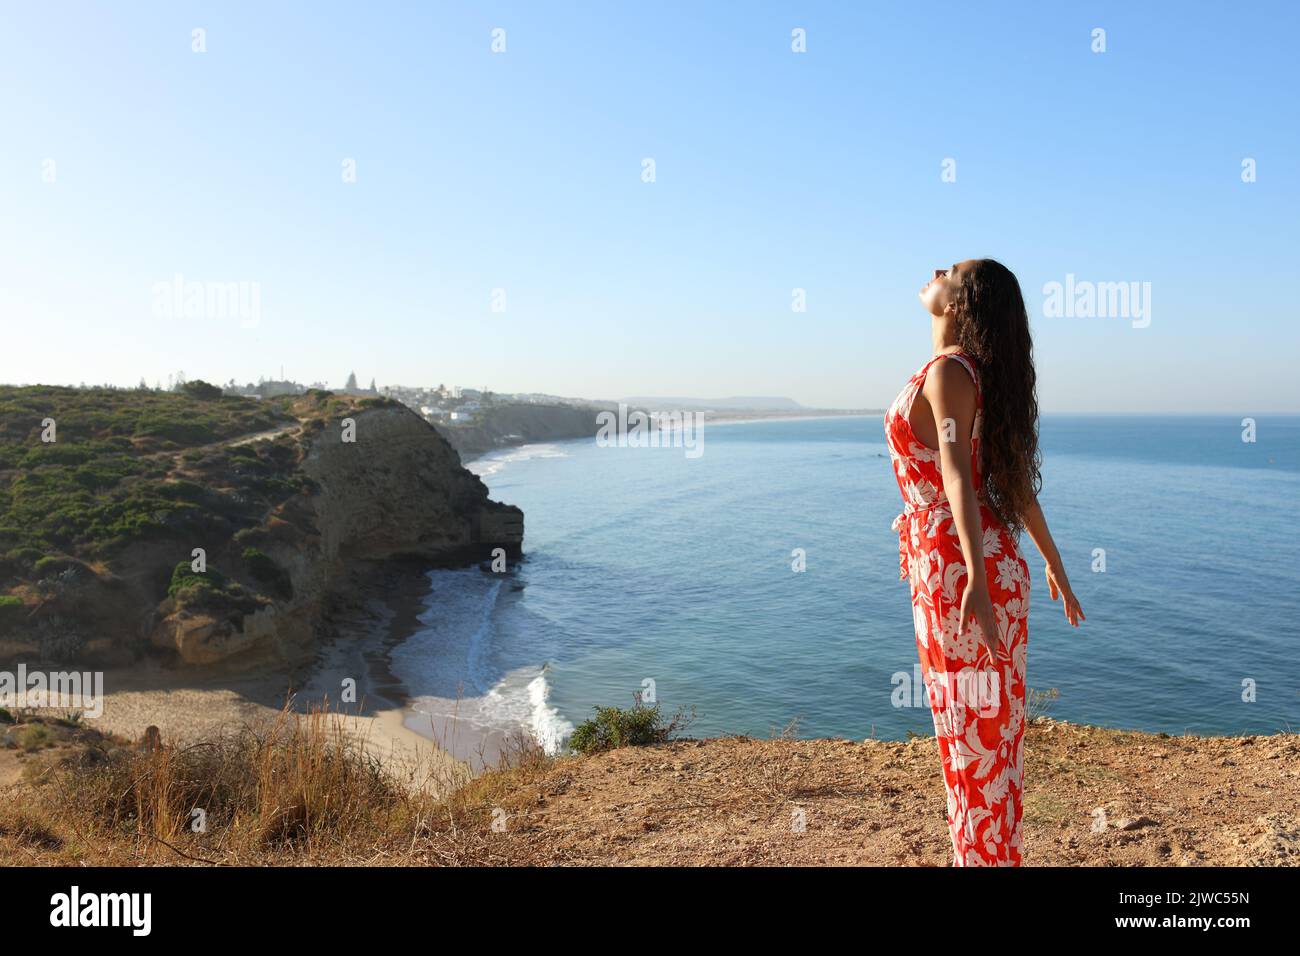 Woman in red dress breathing fresh air on a clif on the beach Stock Photo